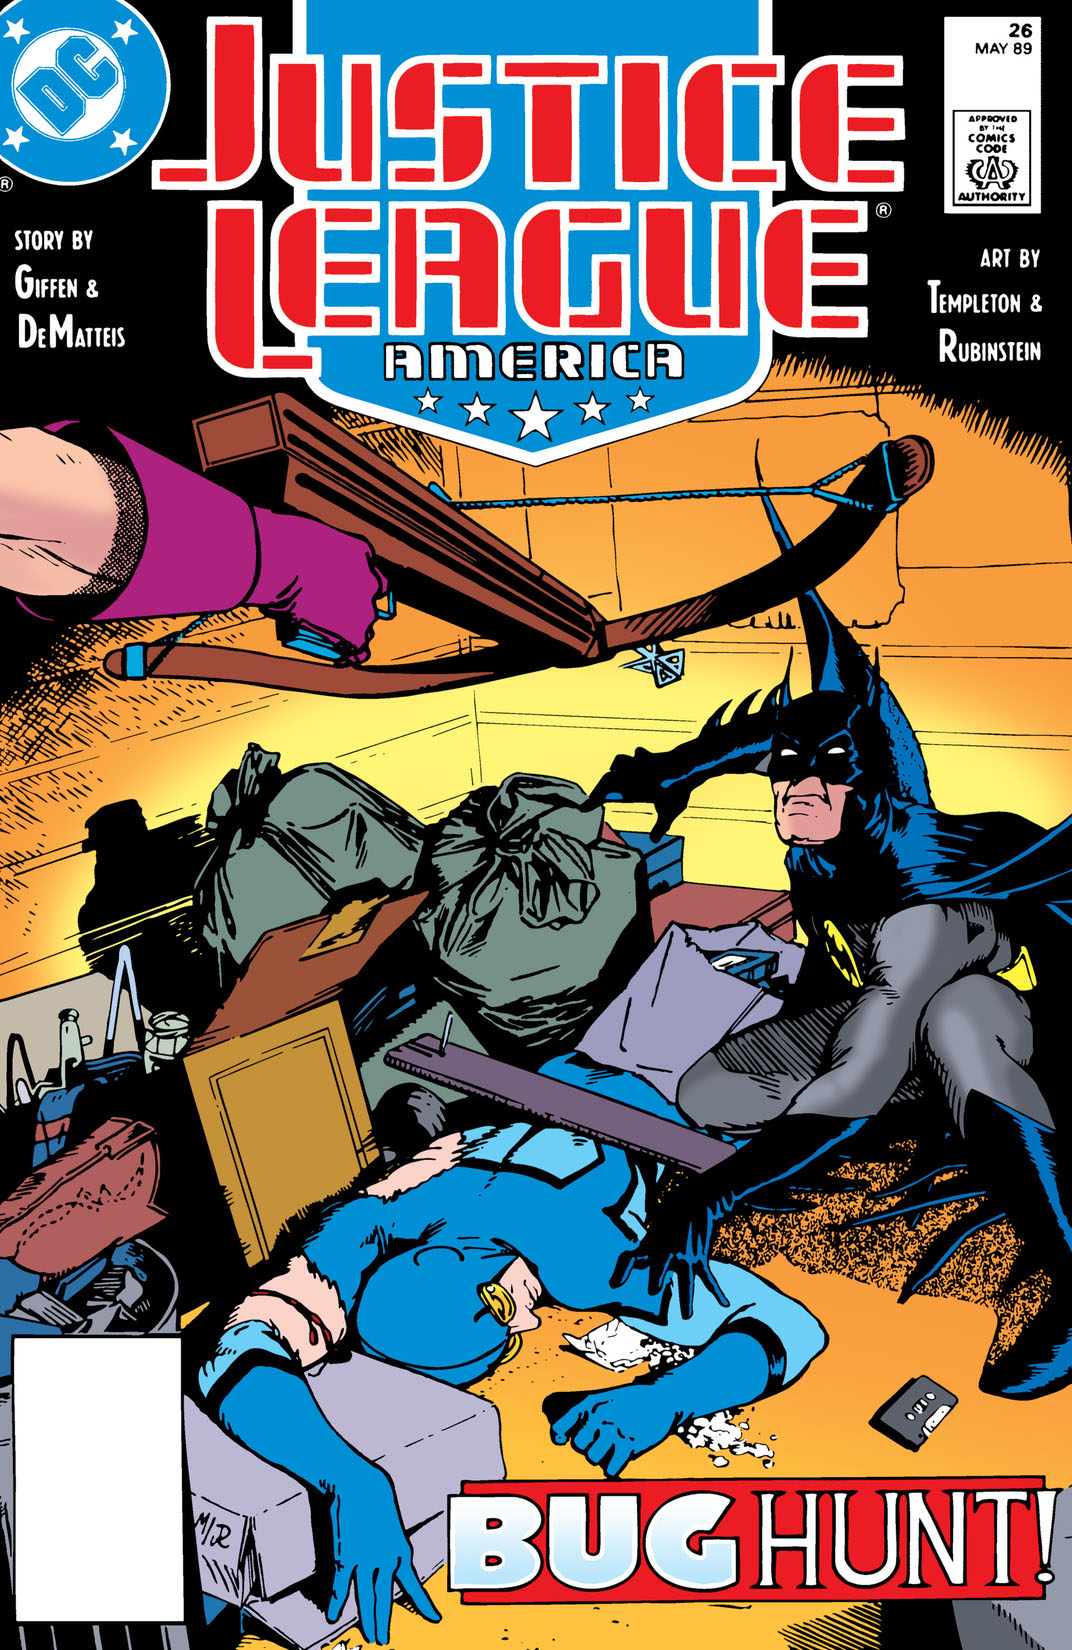 Justice League America (1987-1996) #26 preview images